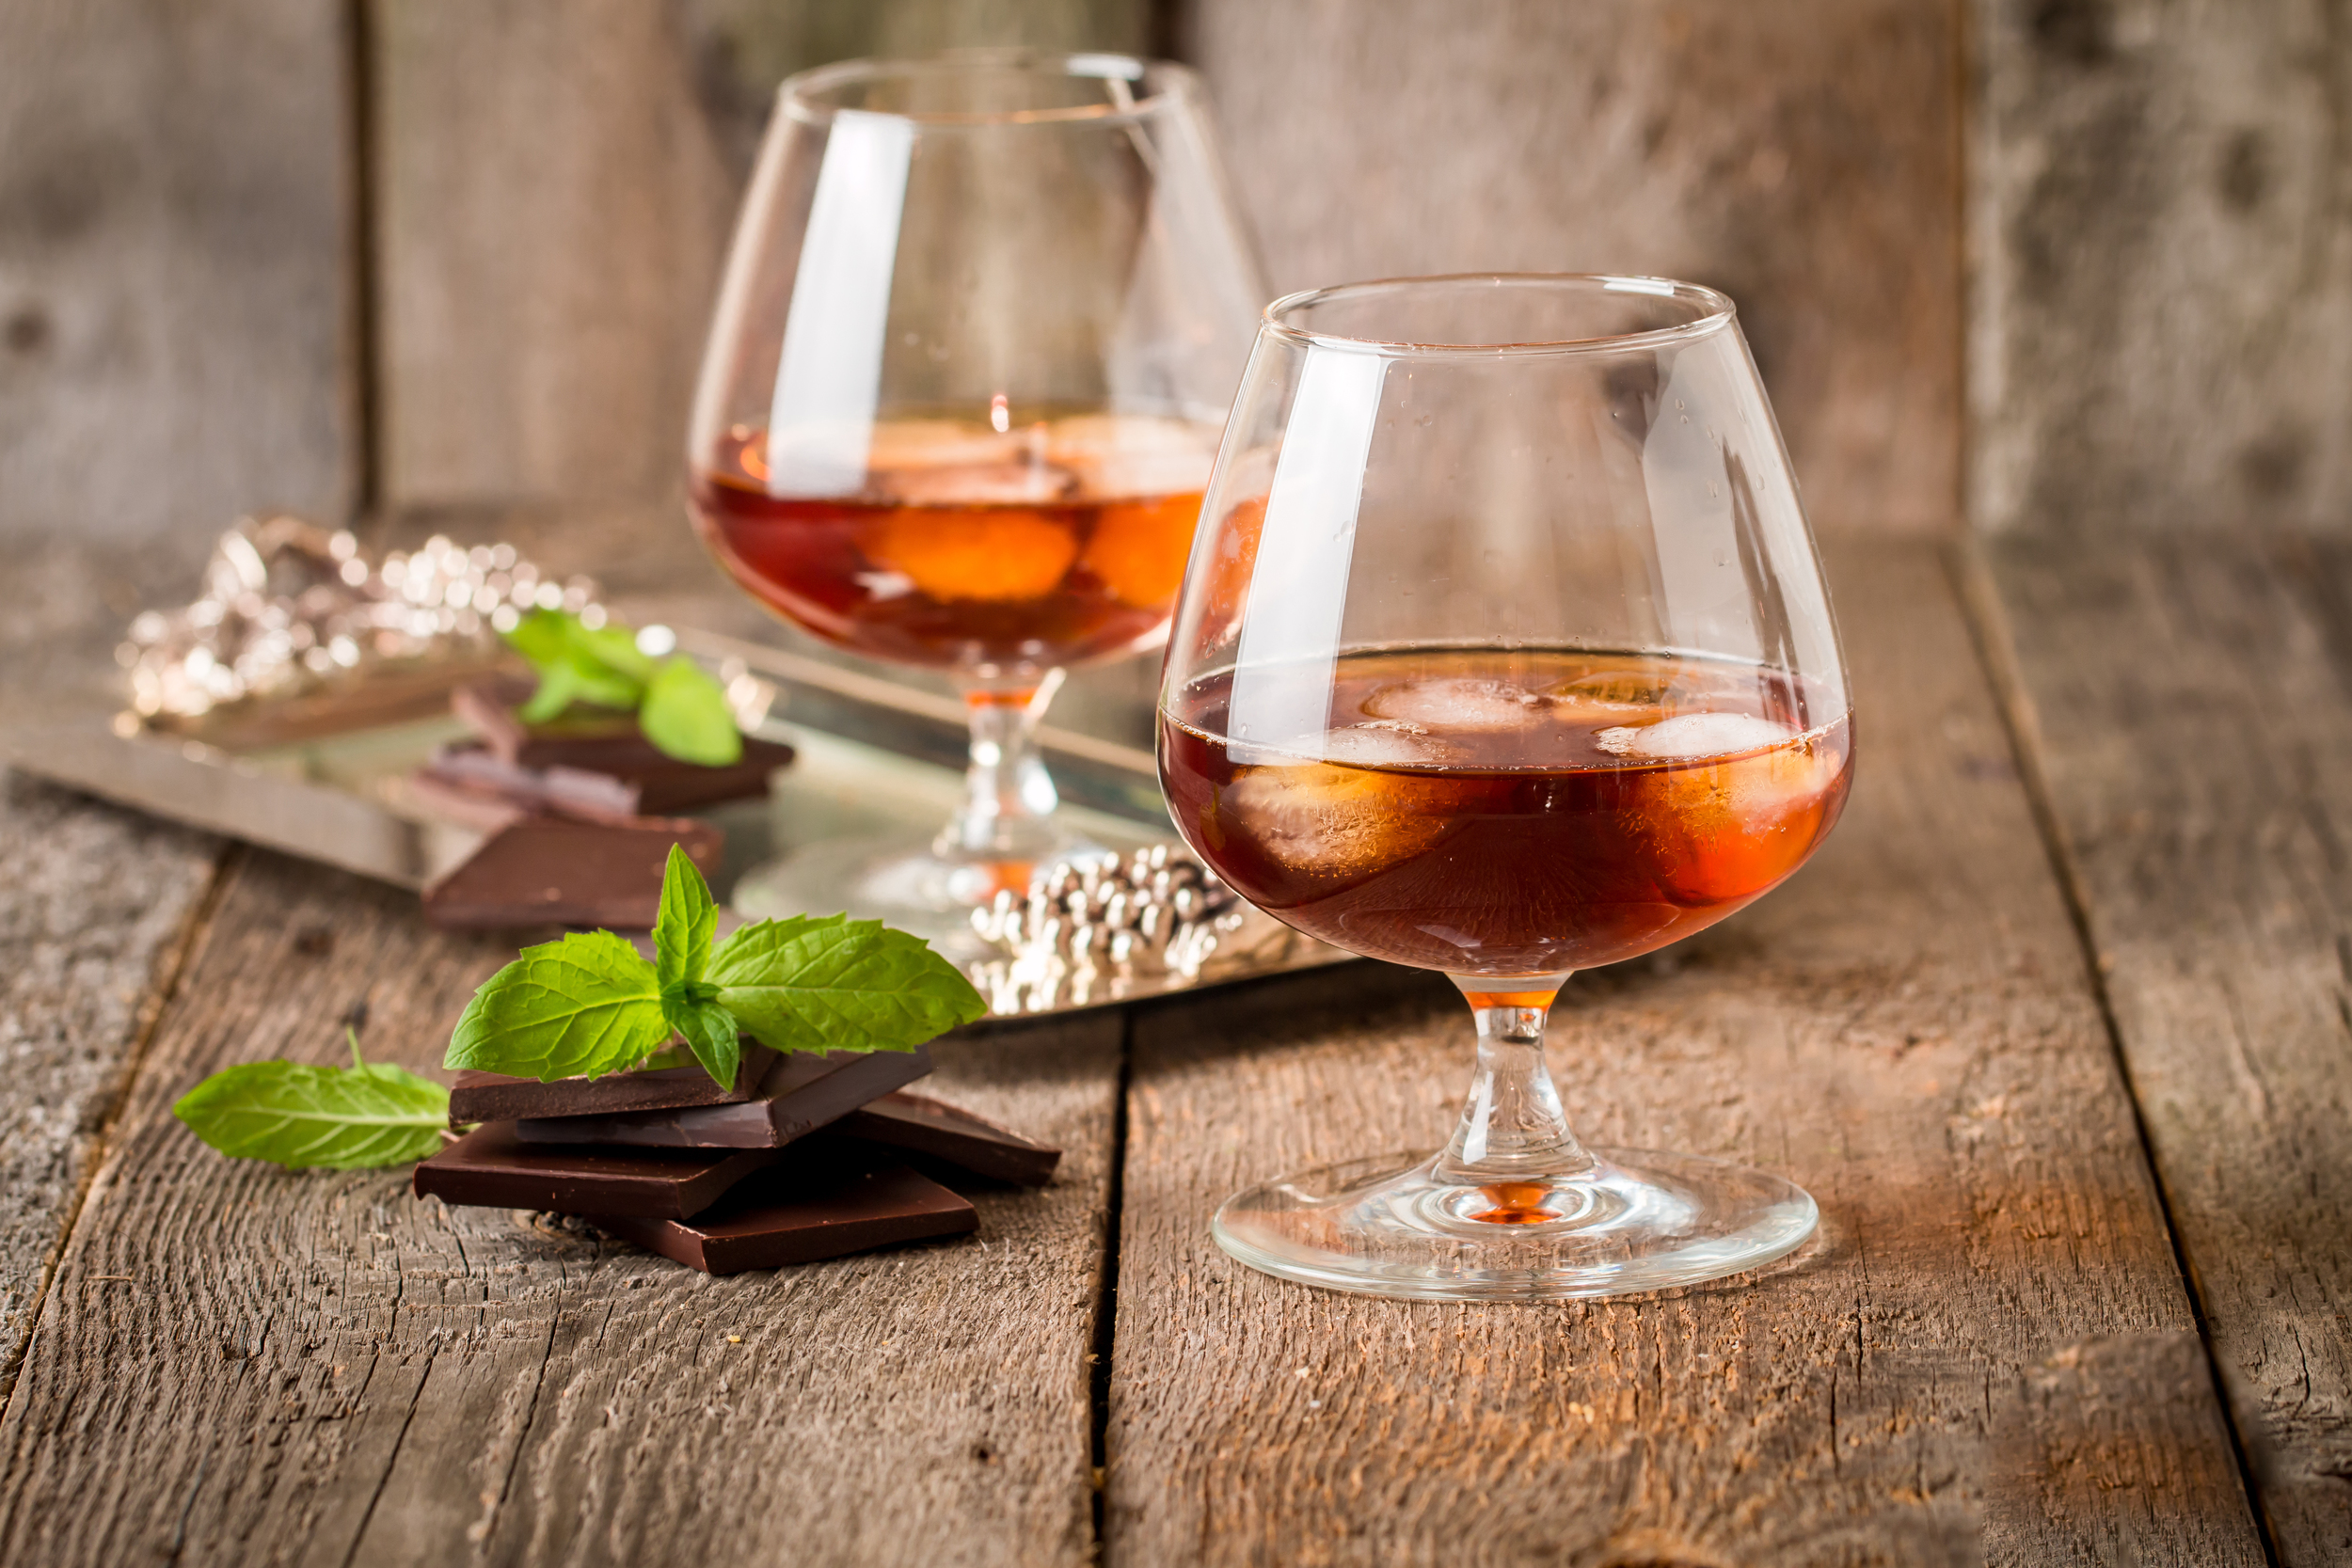 stock-photo-vintage-cognac-still-life-with-chocolate-on-wooden-background-343544321.jpg